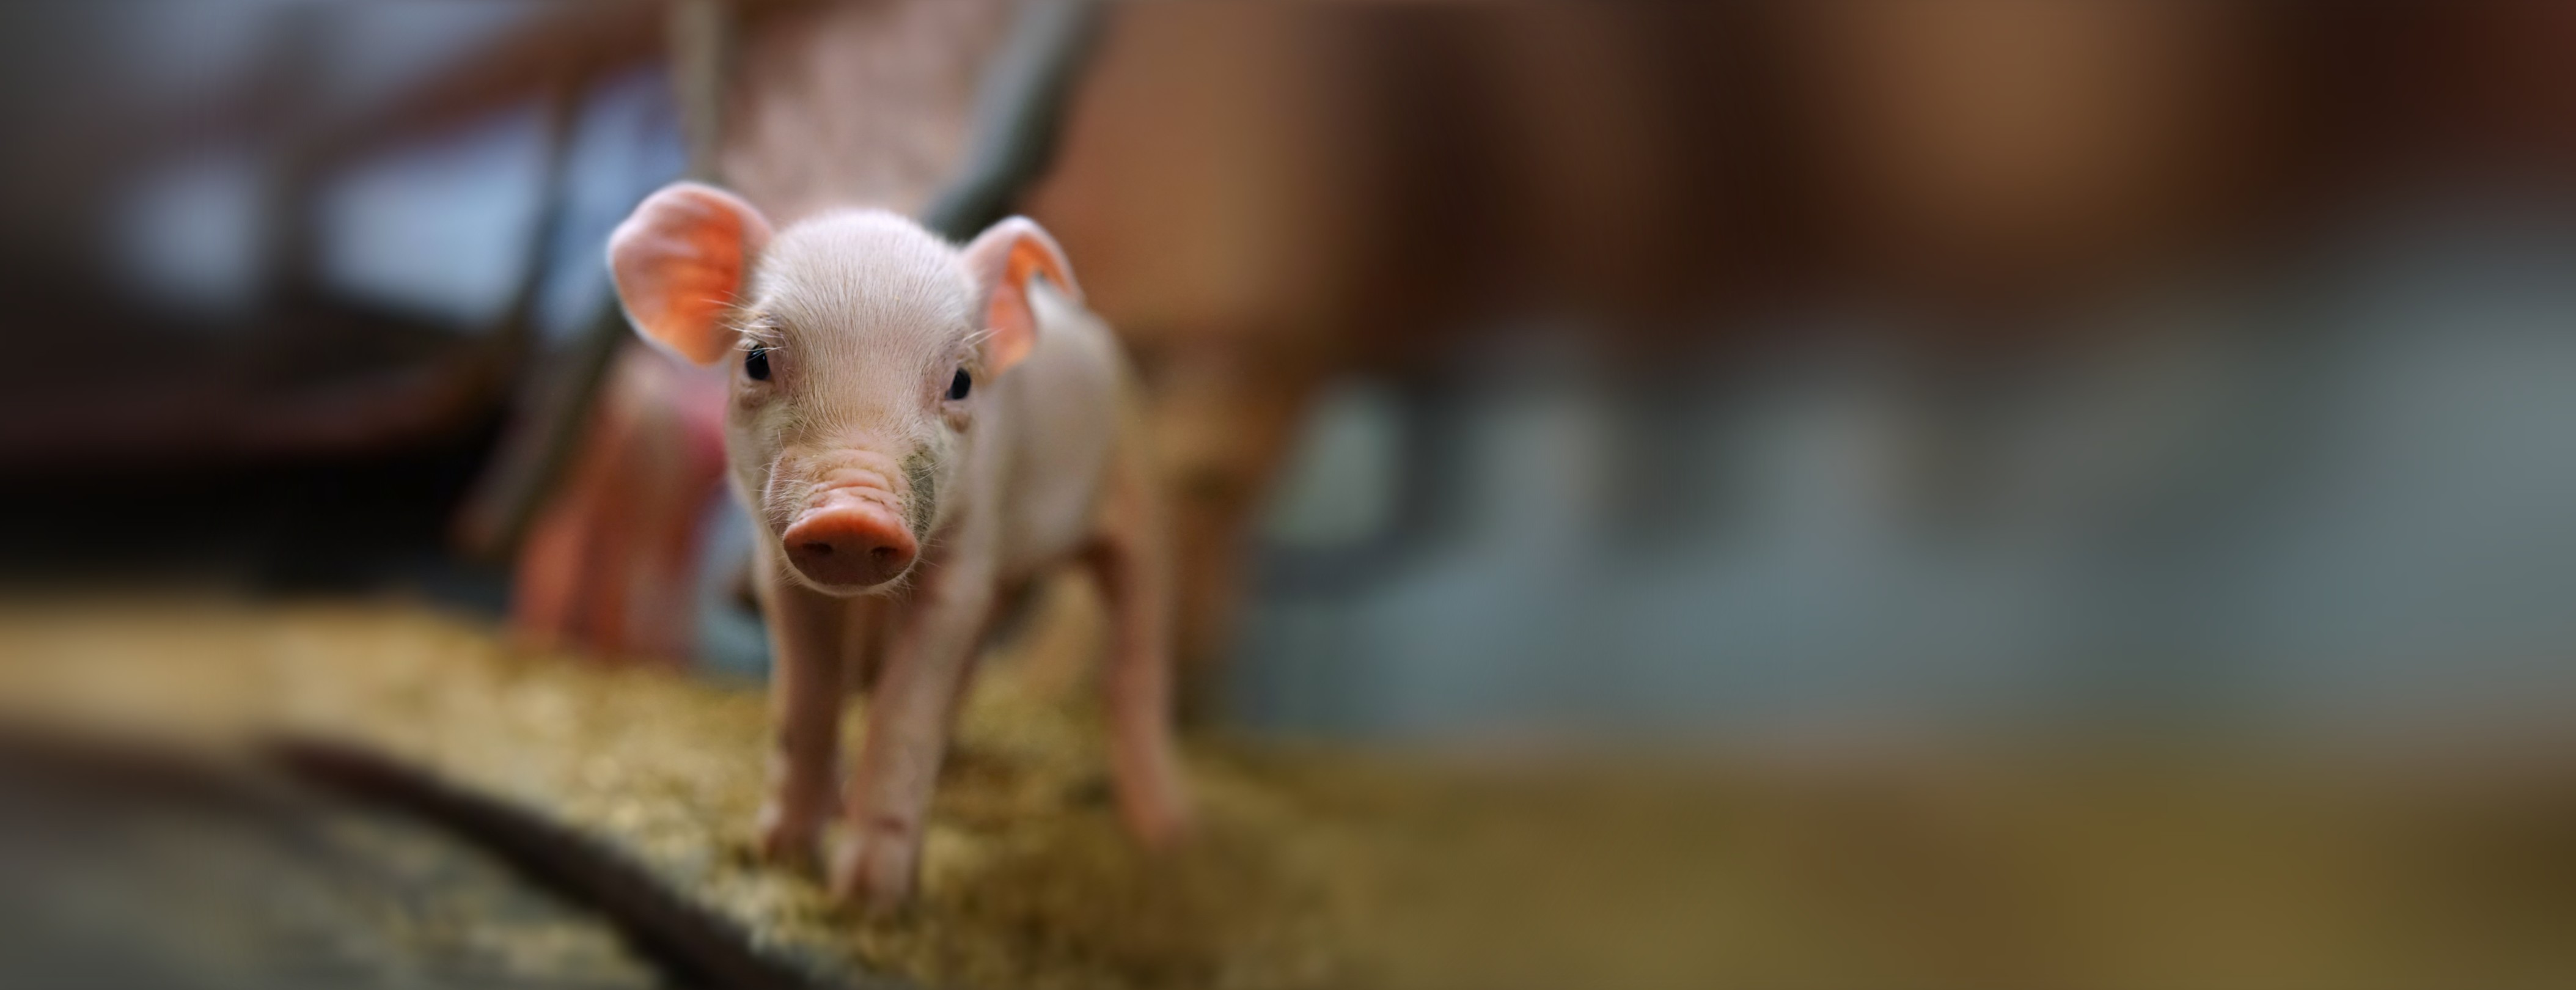 Close-up of piglet with blurred background